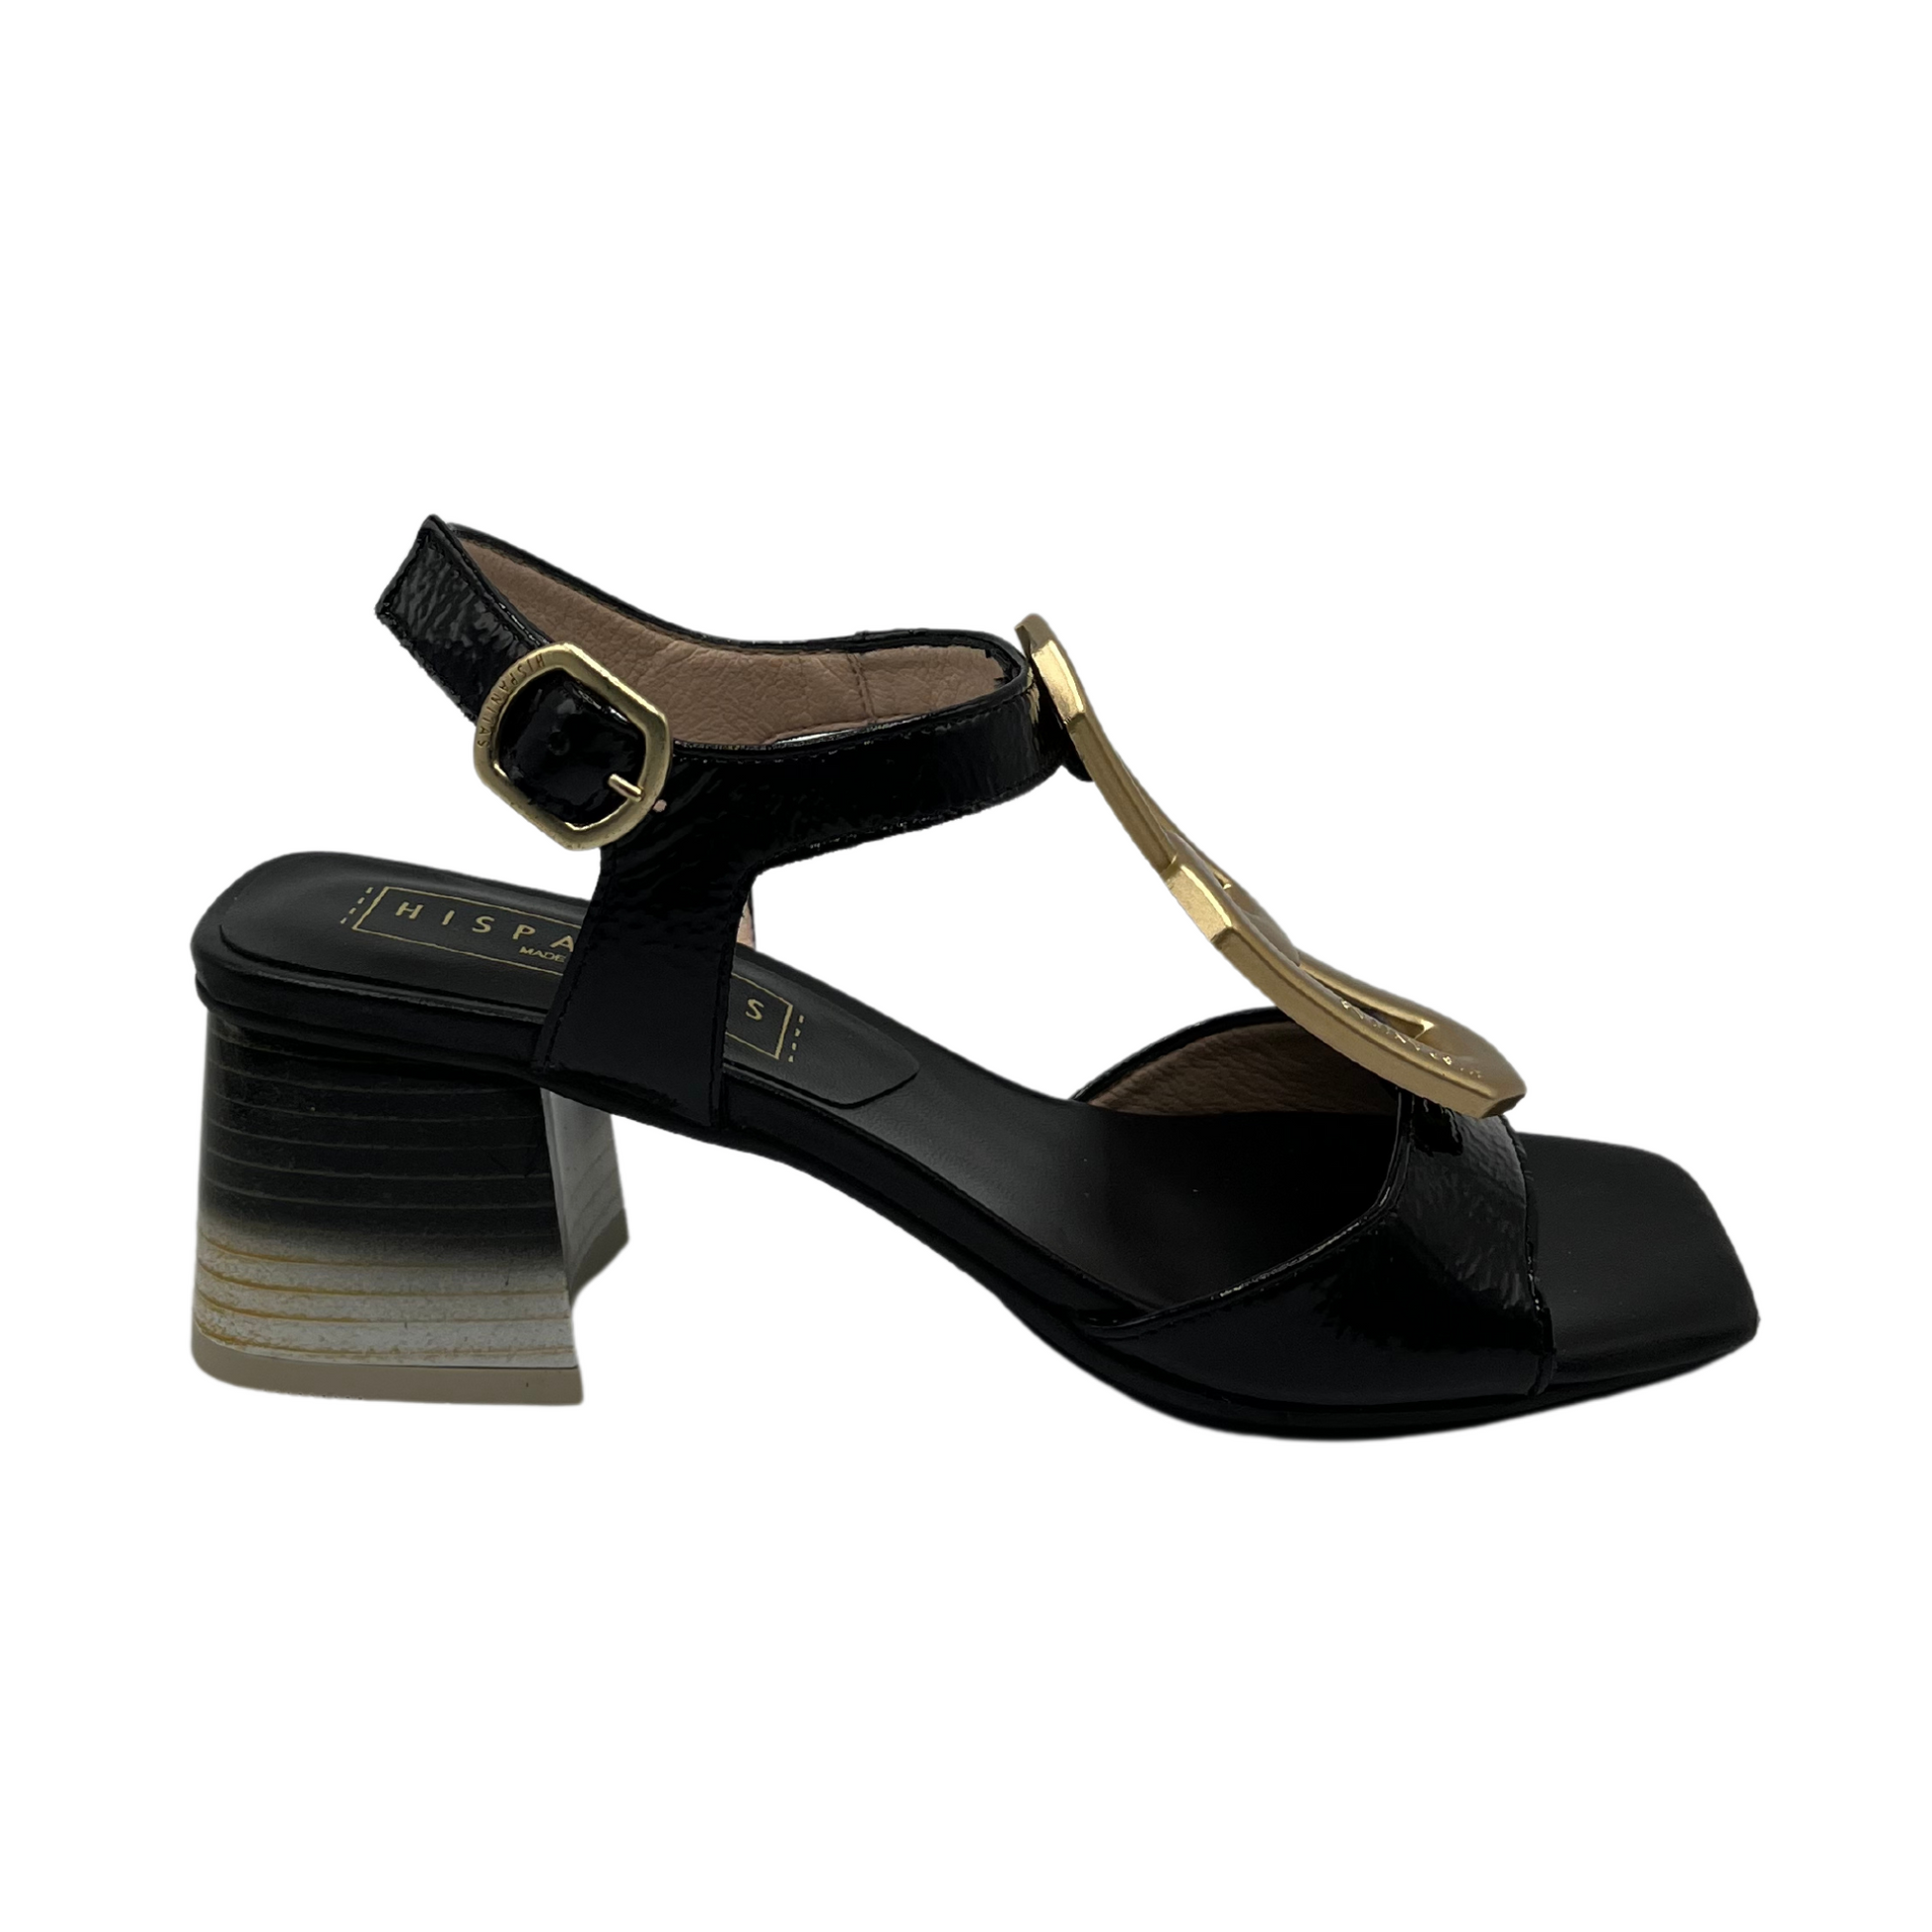 Right facing view of black patent leather sandals with adjustable strap, ombre heel and gold brooch detail on upper